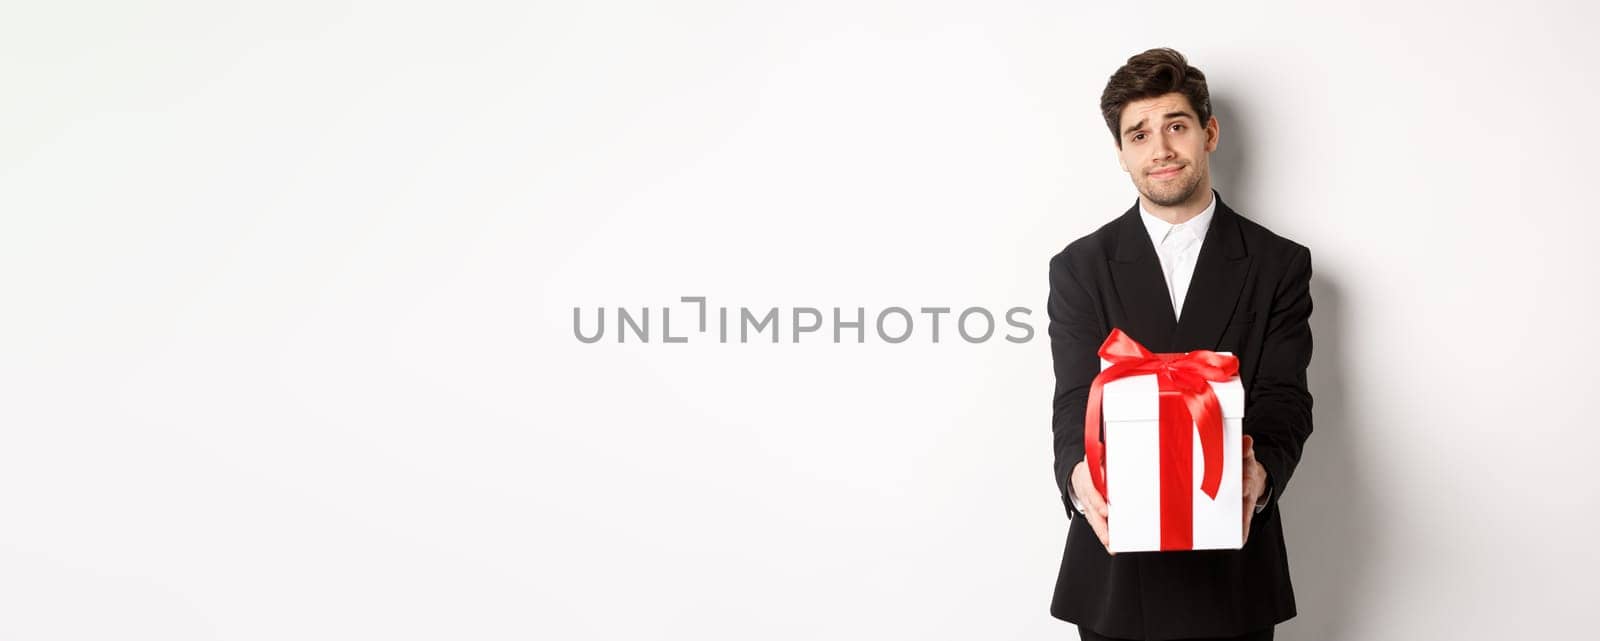 Concept of christmas holidays, celebration and lifestyle. Image of handsome boyfriend in black suit, giving you a present, extending hands with gift, standing over white background.